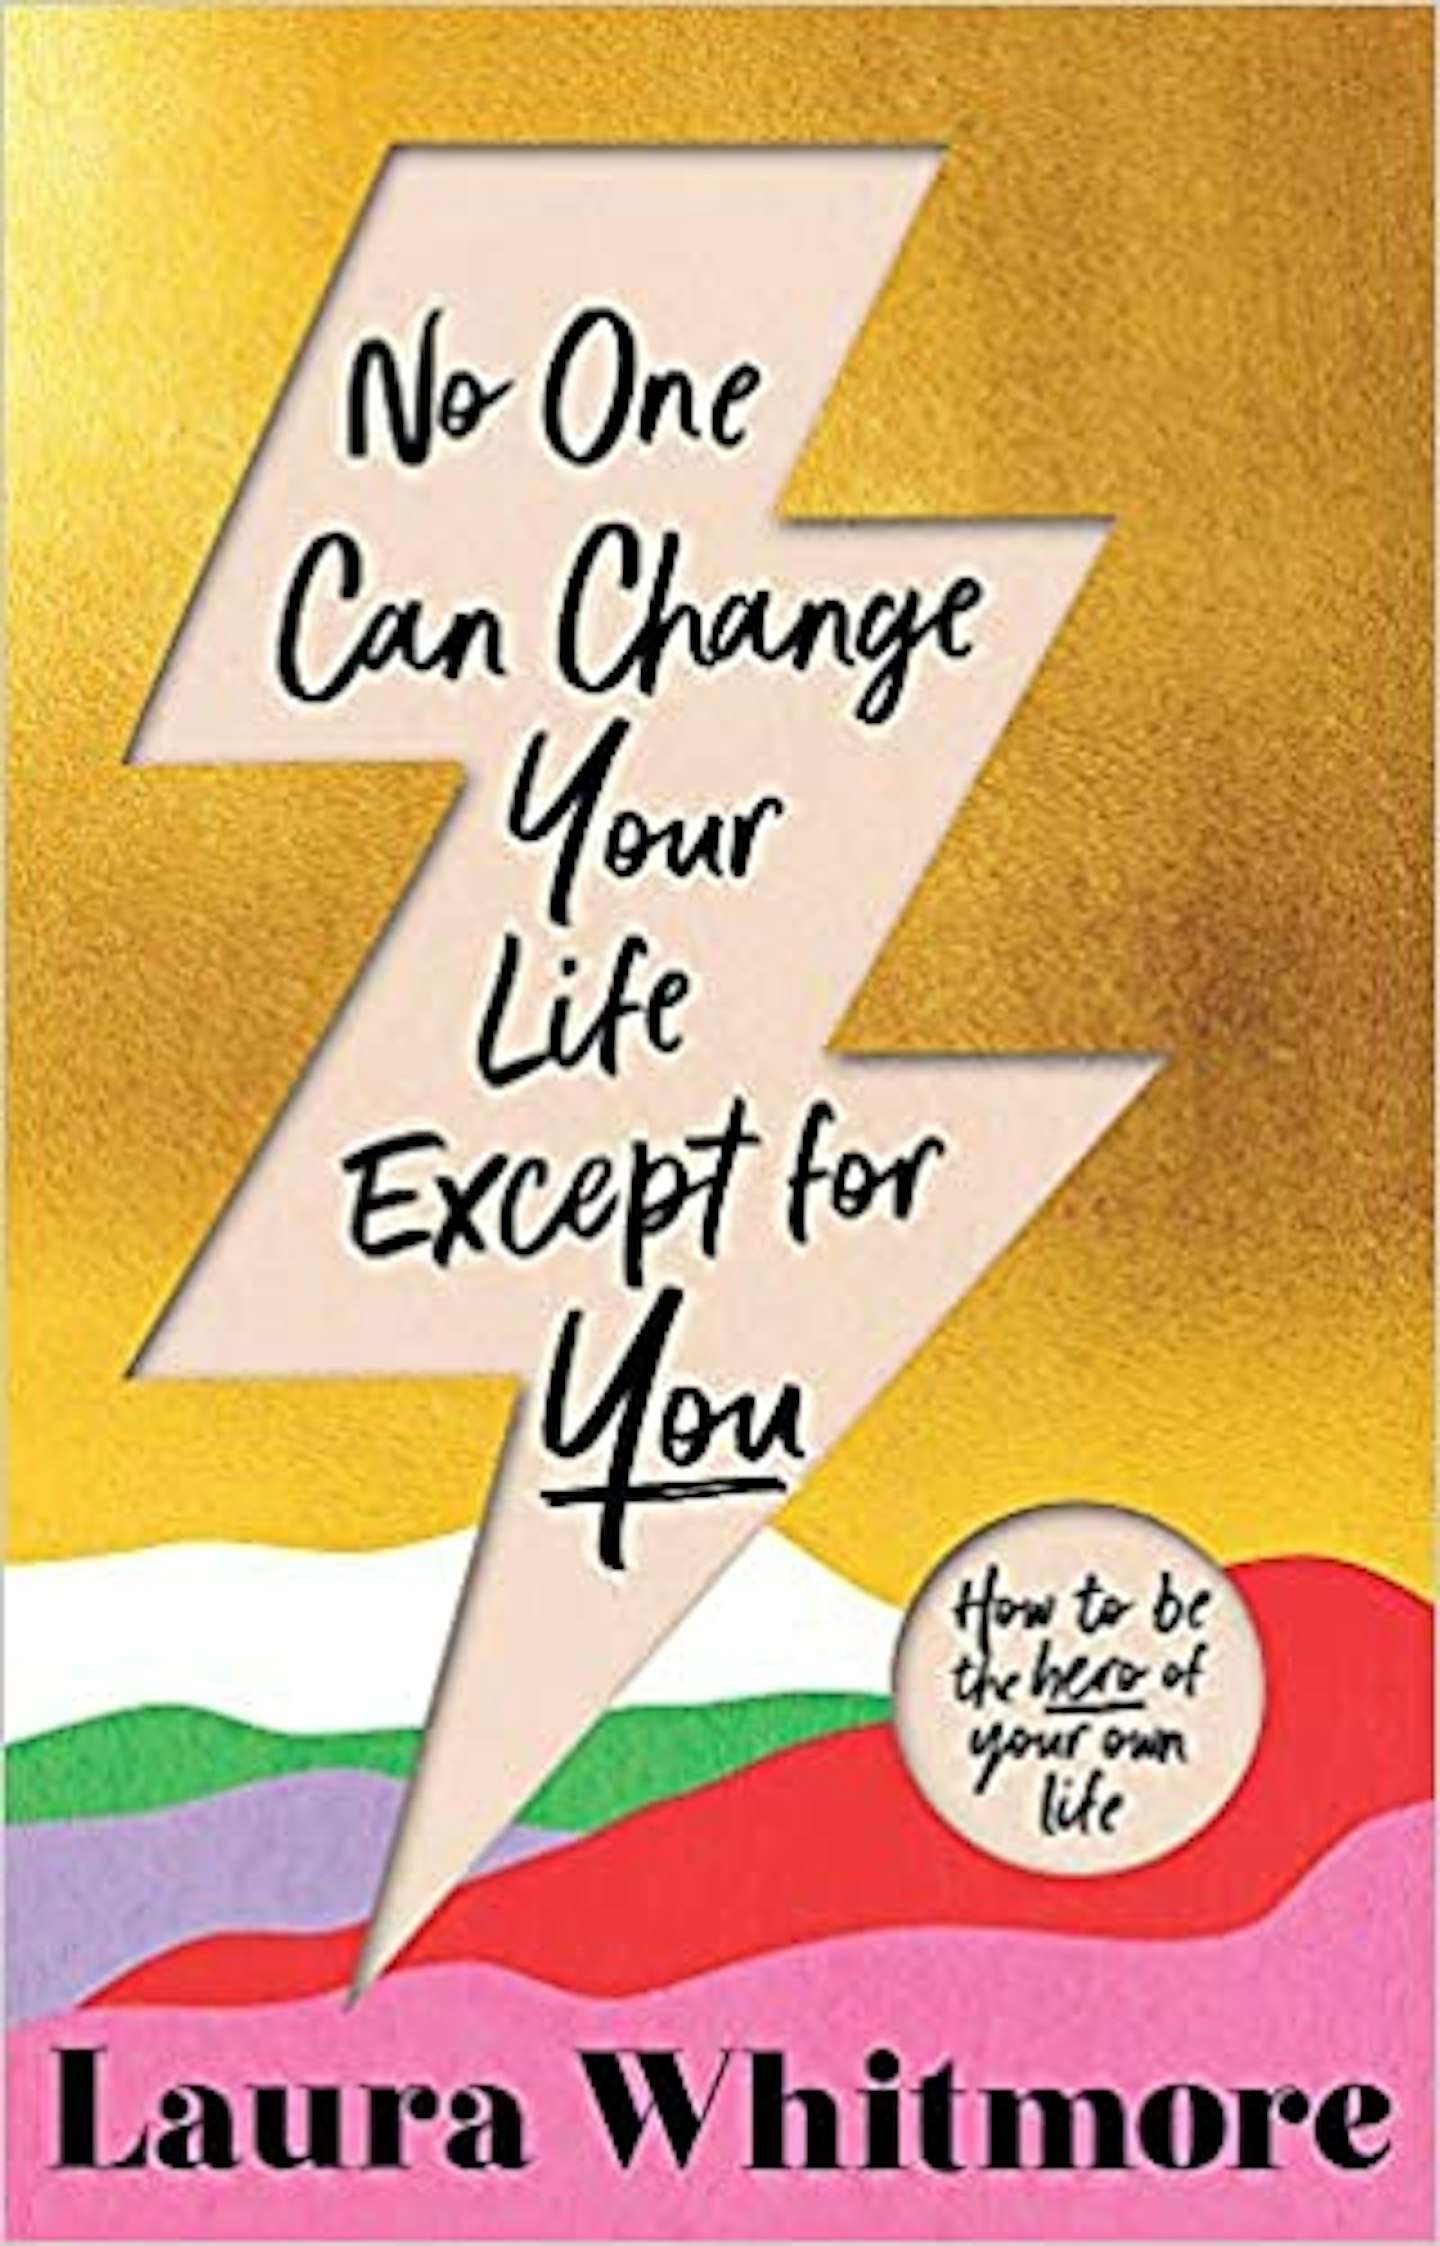 best self help books No One Can Change Your Life Except For You, by Laura Whitmore